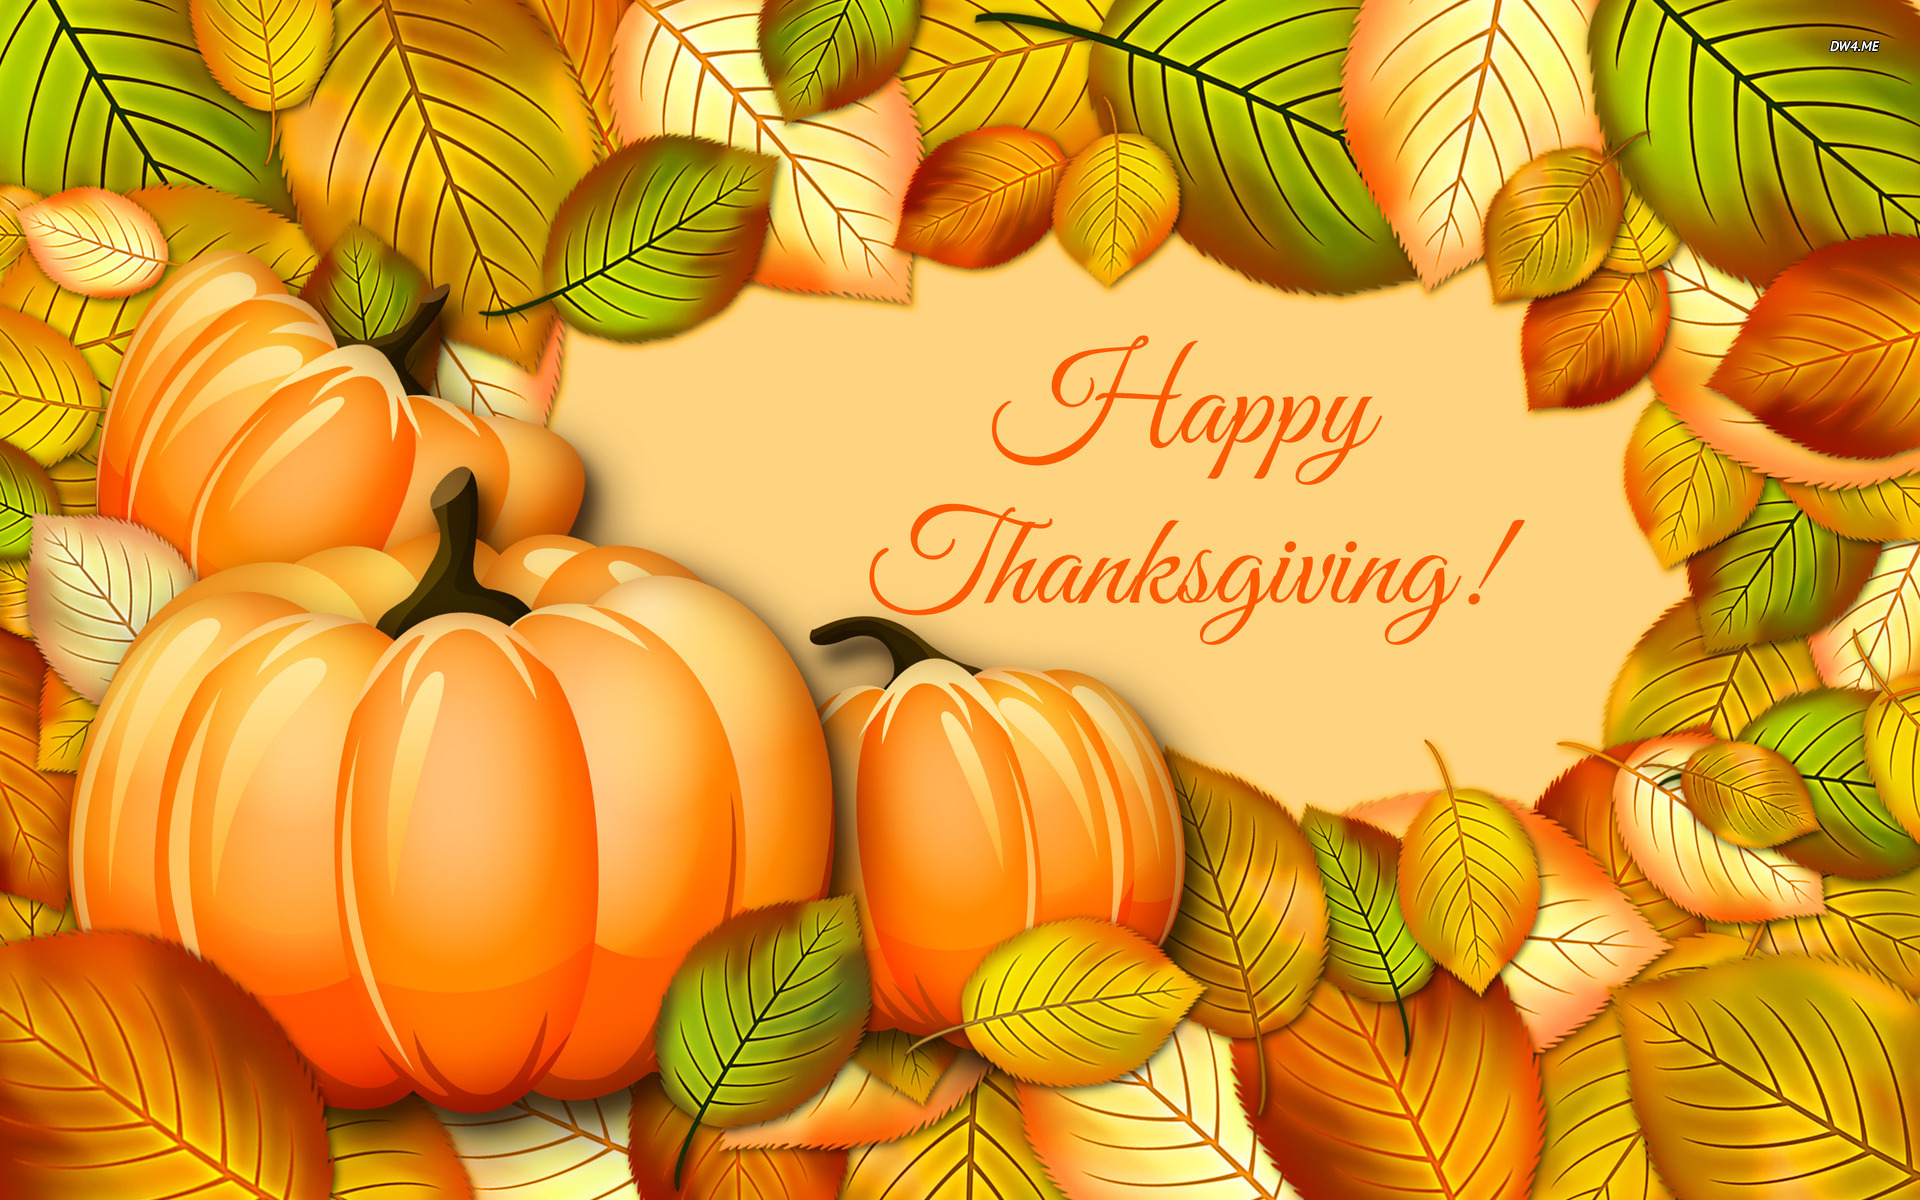 Happy Thanksgiving wallpaper   Holiday wallpapers   1842